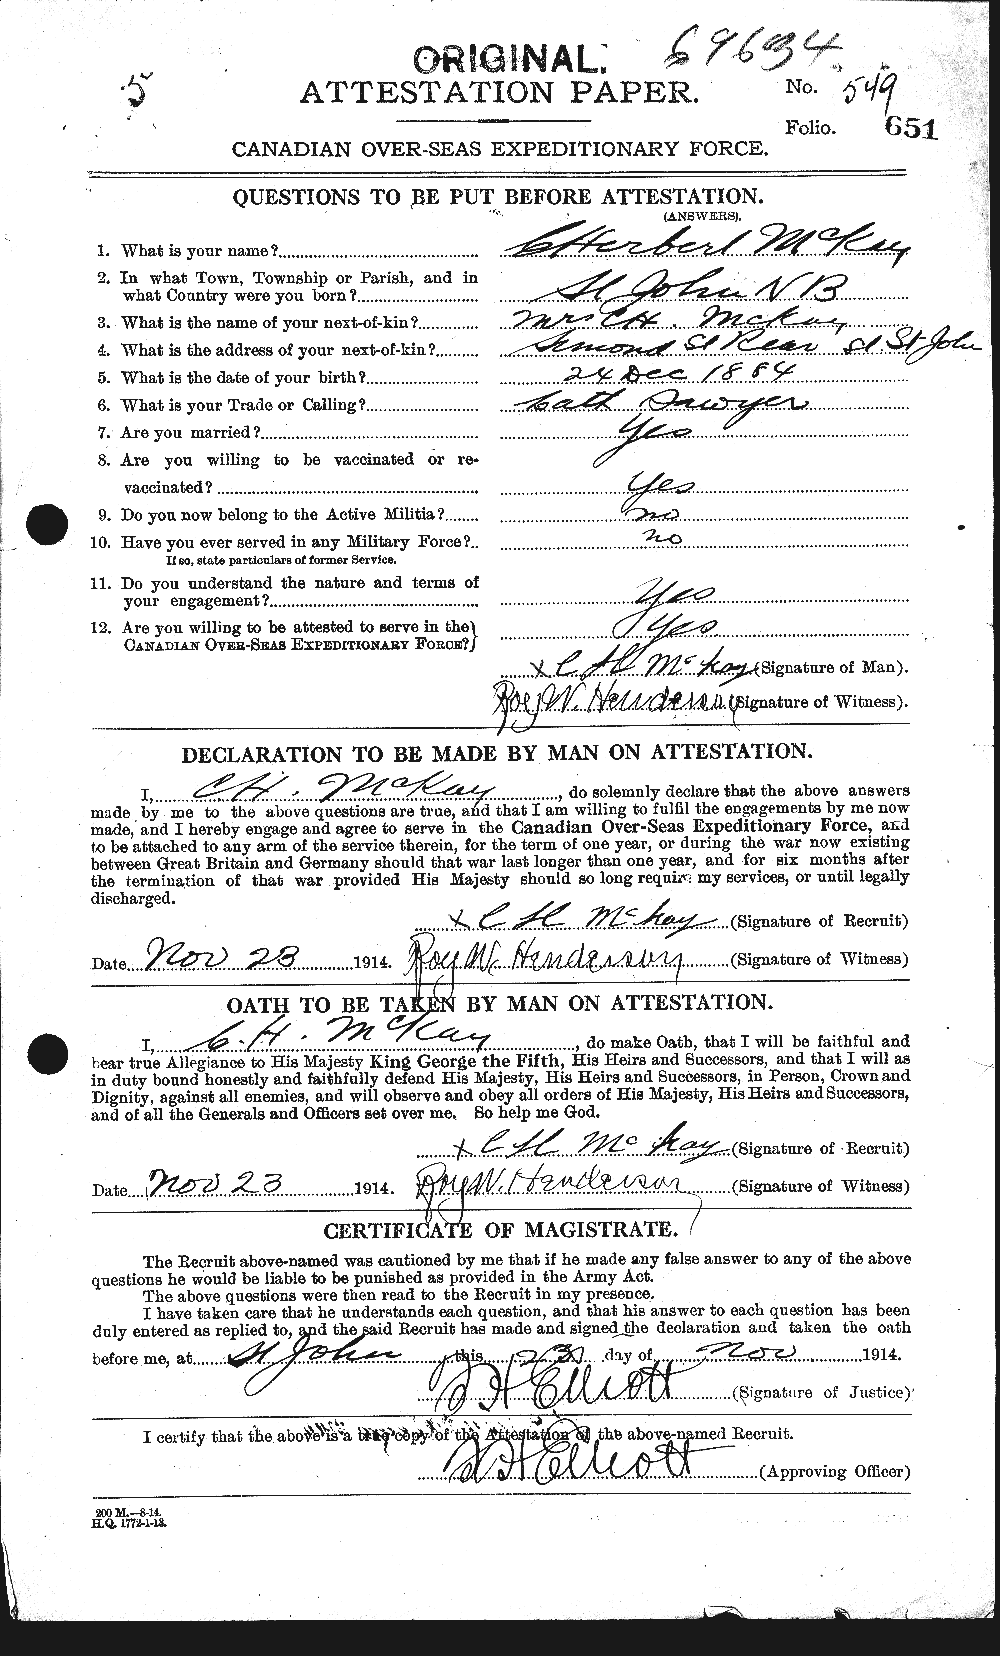 Personnel Records of the First World War - CEF 531046a